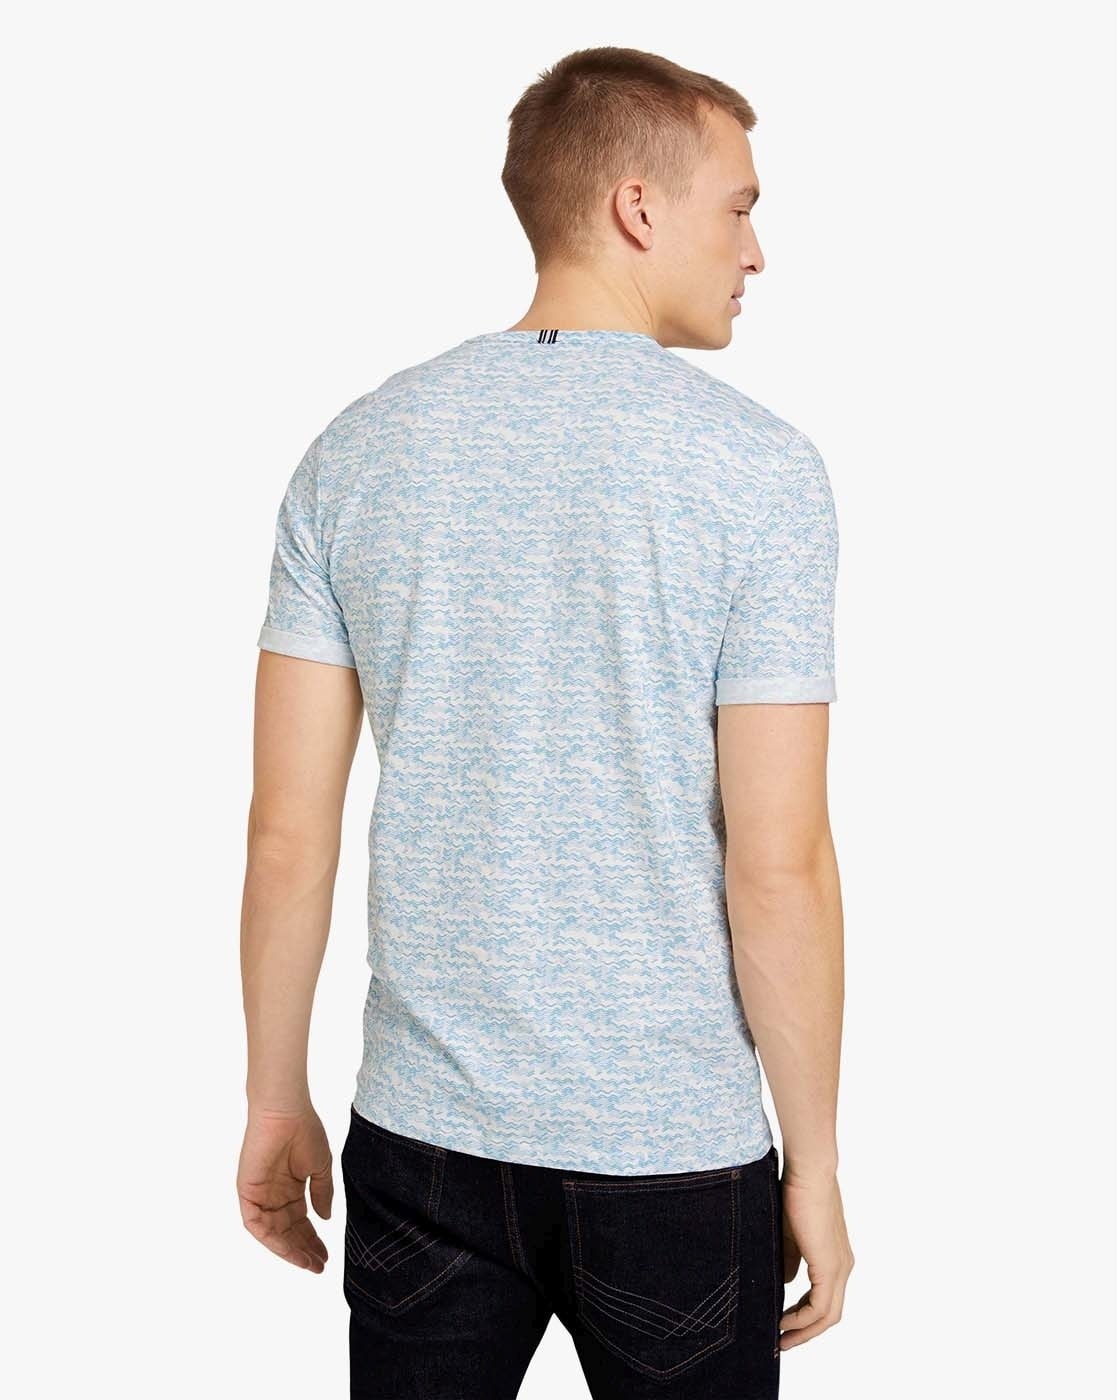 by Tshirts Blue Men Online Tailor Buy for Tom